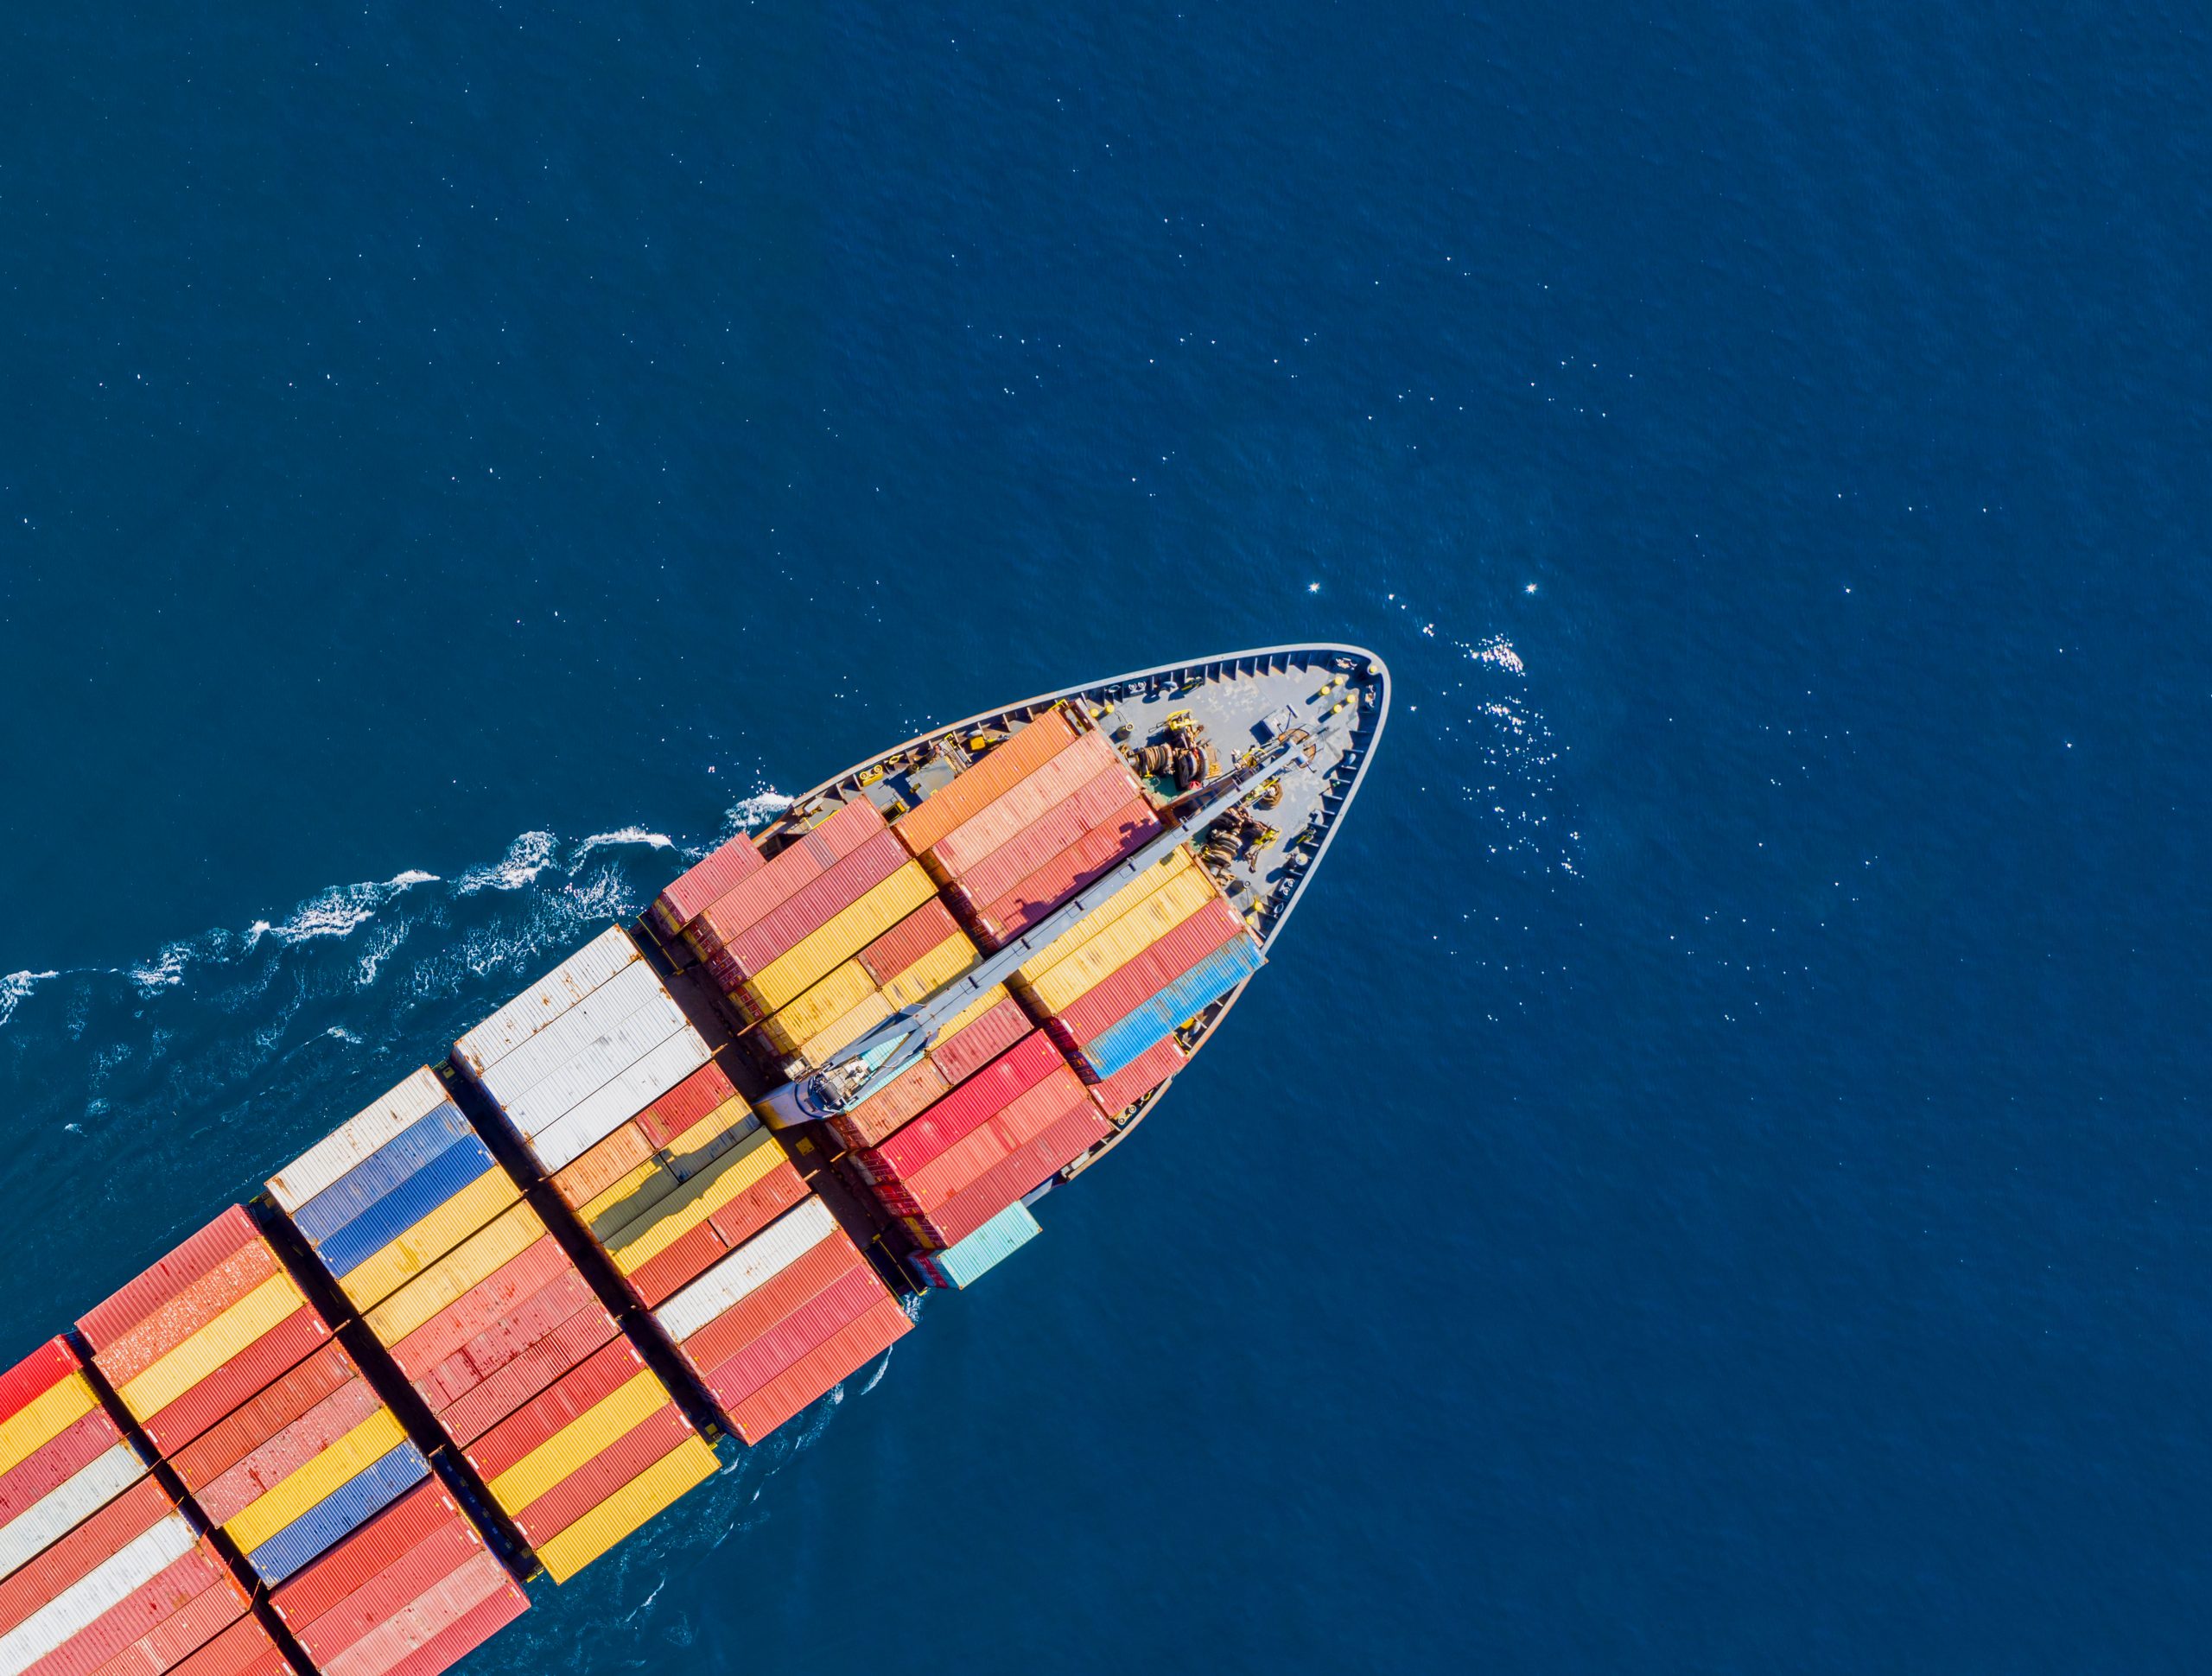 Container cargo ship, import export business and logistics, aerial top view. Water transport, international freight shipping, commercial trade and transportation in the open sea